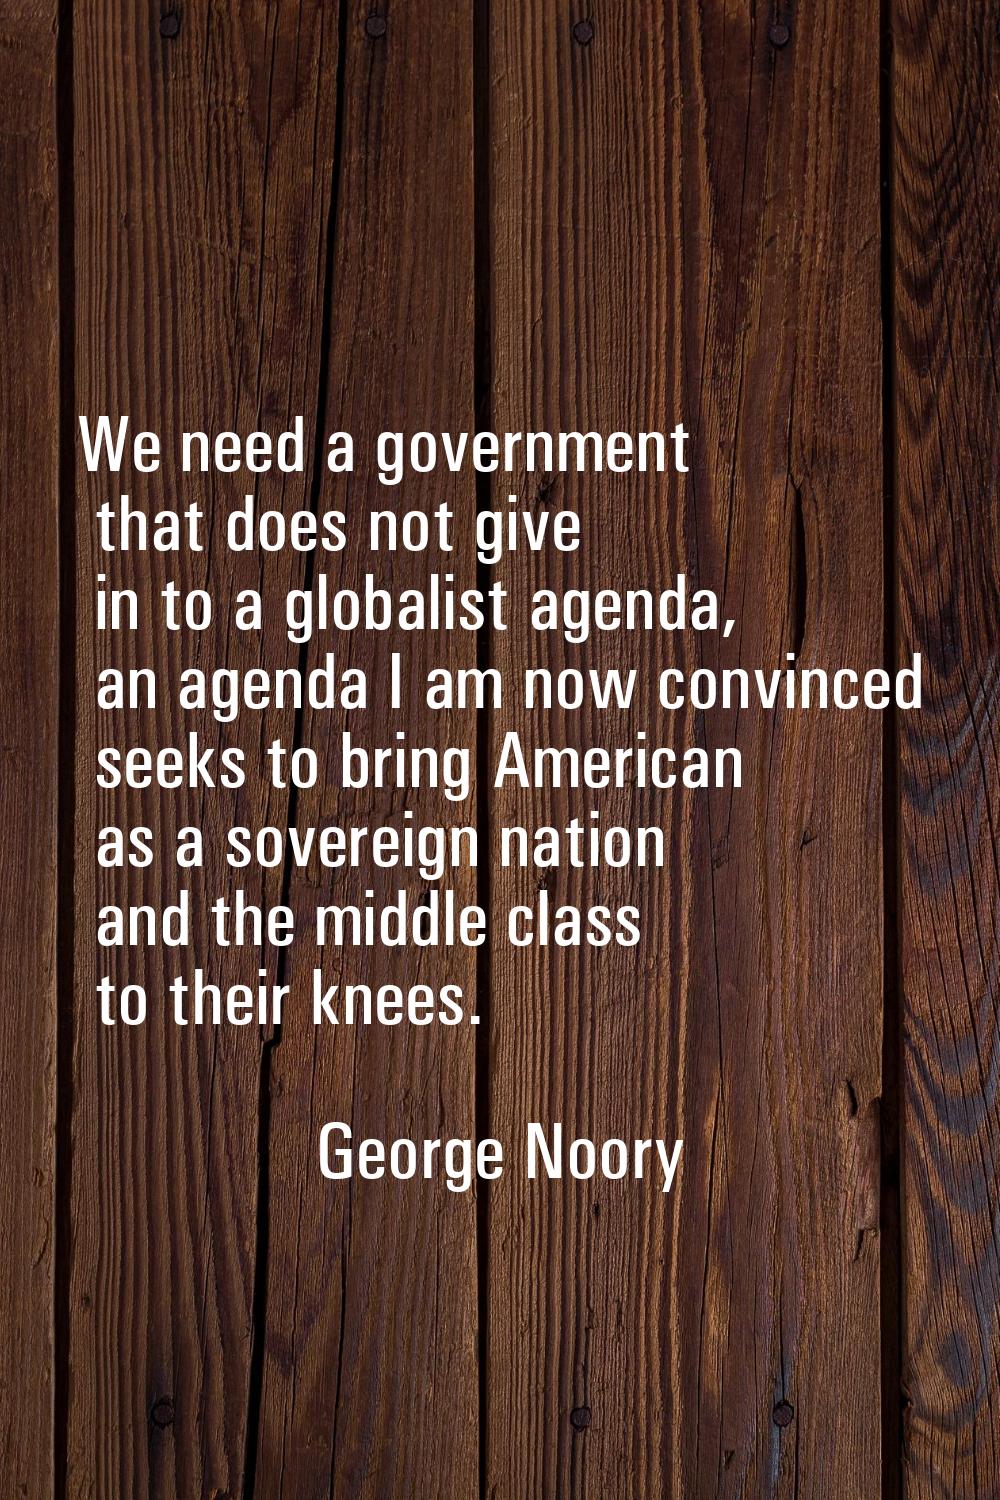 We need a government that does not give in to a globalist agenda, an agenda I am now convinced seek